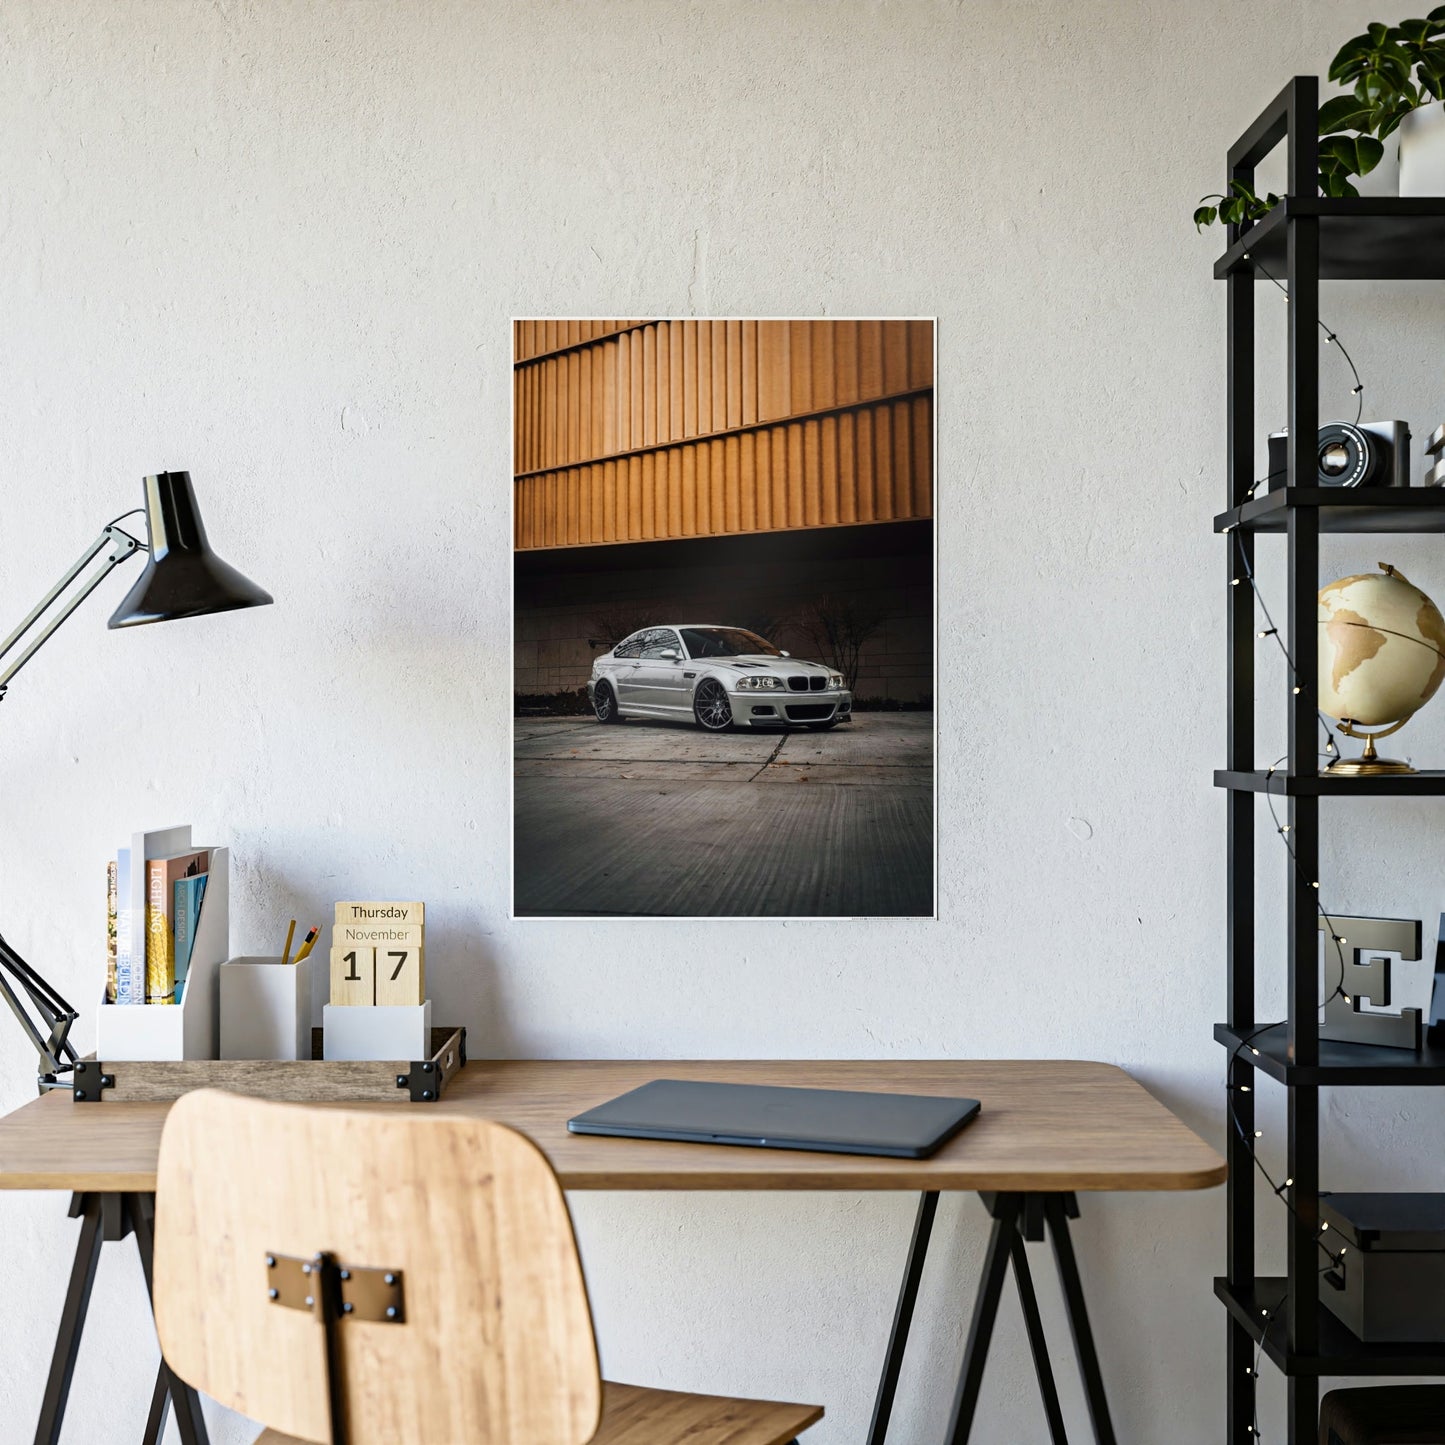 The Beauty and Power of BMW: Striking Wall Art on Framed Poster & Canvas